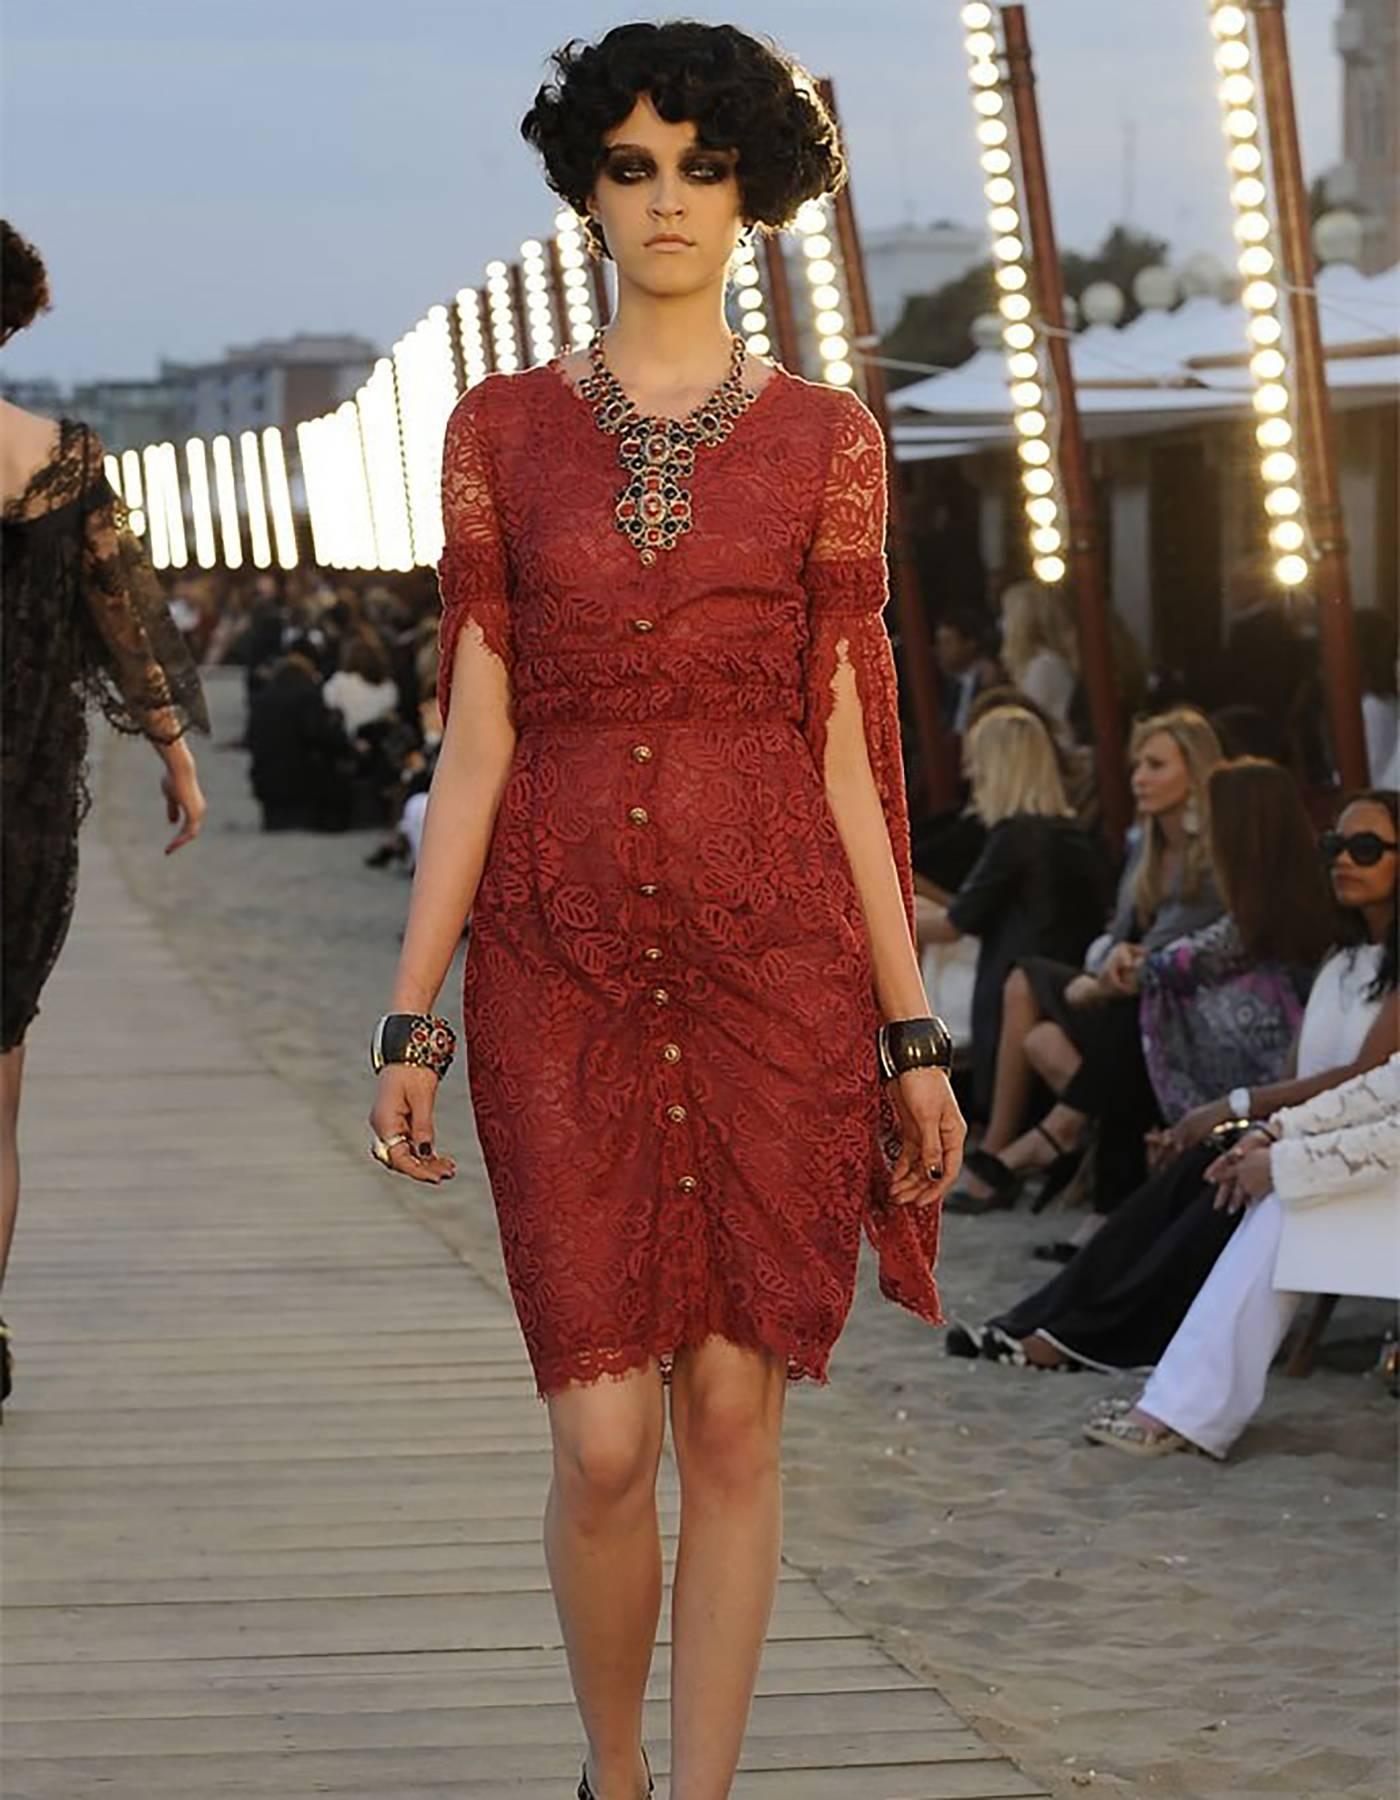 Chanel '10 Resort Runway Burgundy & Navy Bib Necklace
Features locket in center where CC pendant is with 